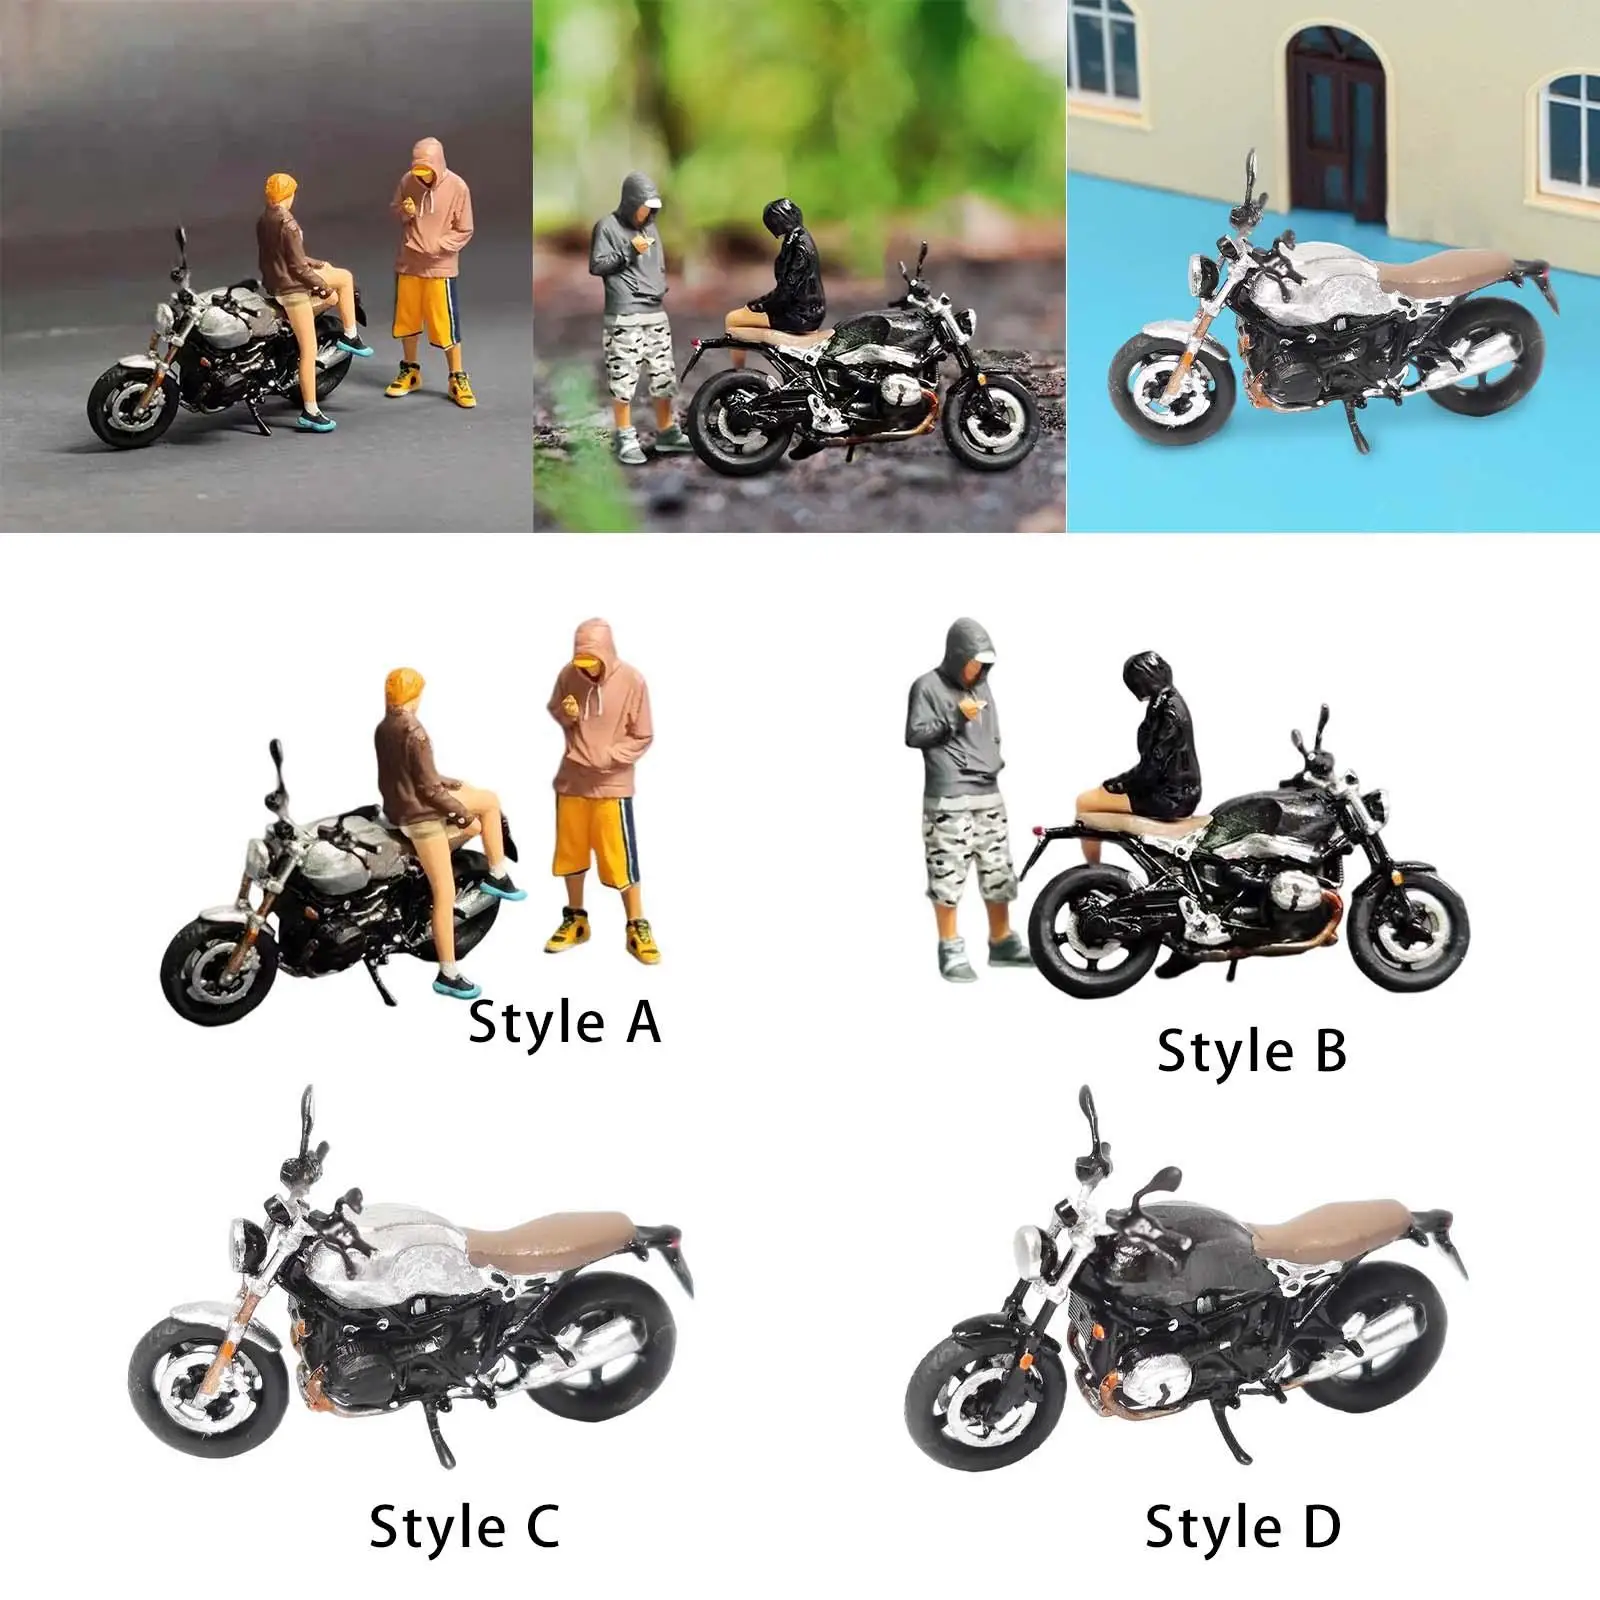 1/64 Figures Motorcycle Street Scene Collections DIY Projects Micro Landscape Tiny People Dioramas Layout Character Model Toy